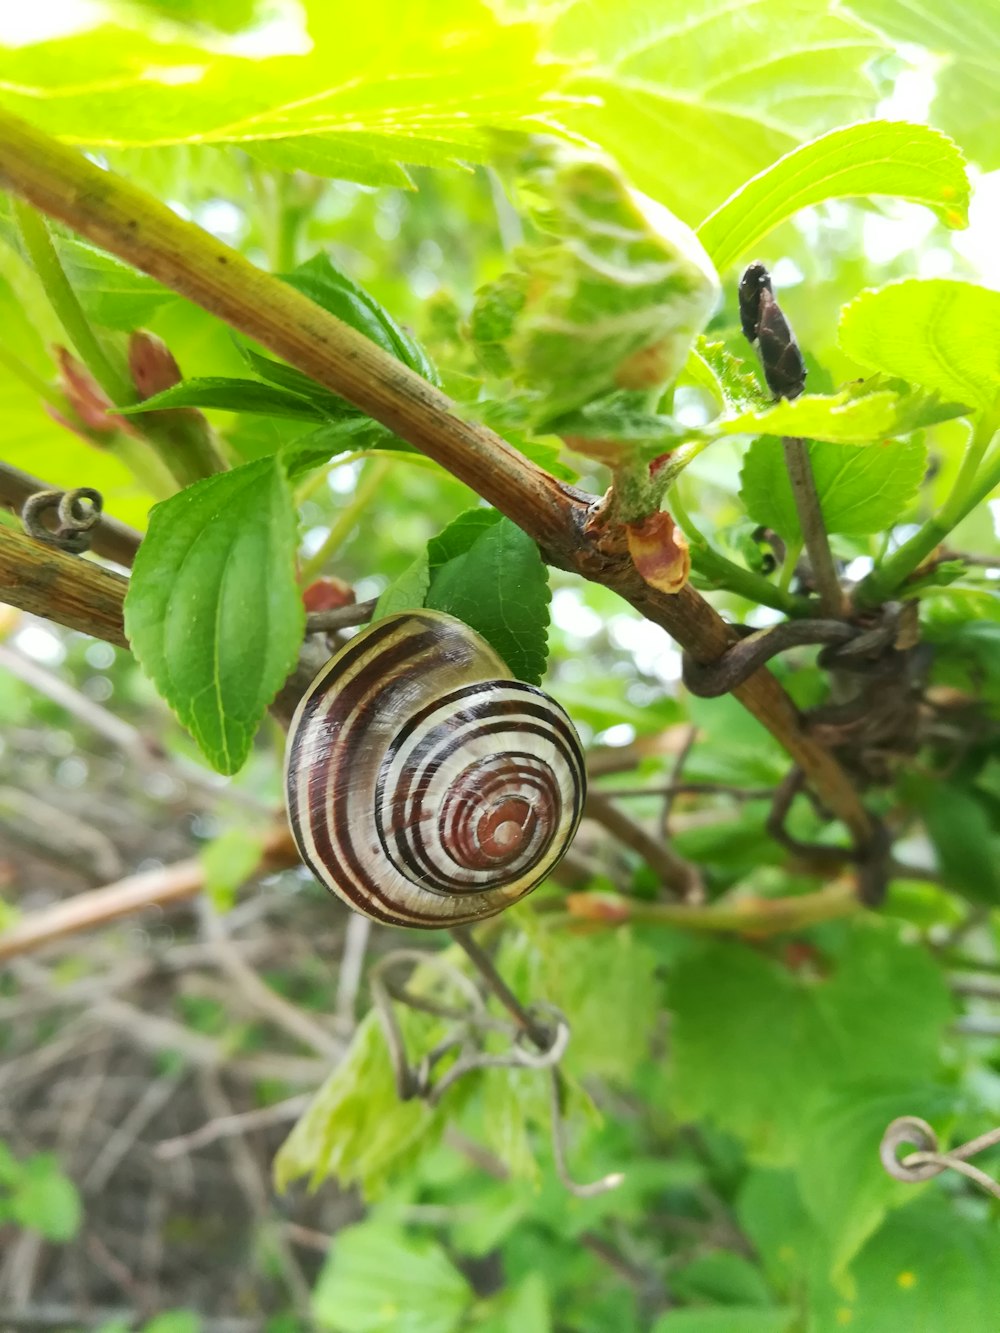 gray and brown snail walking on branch